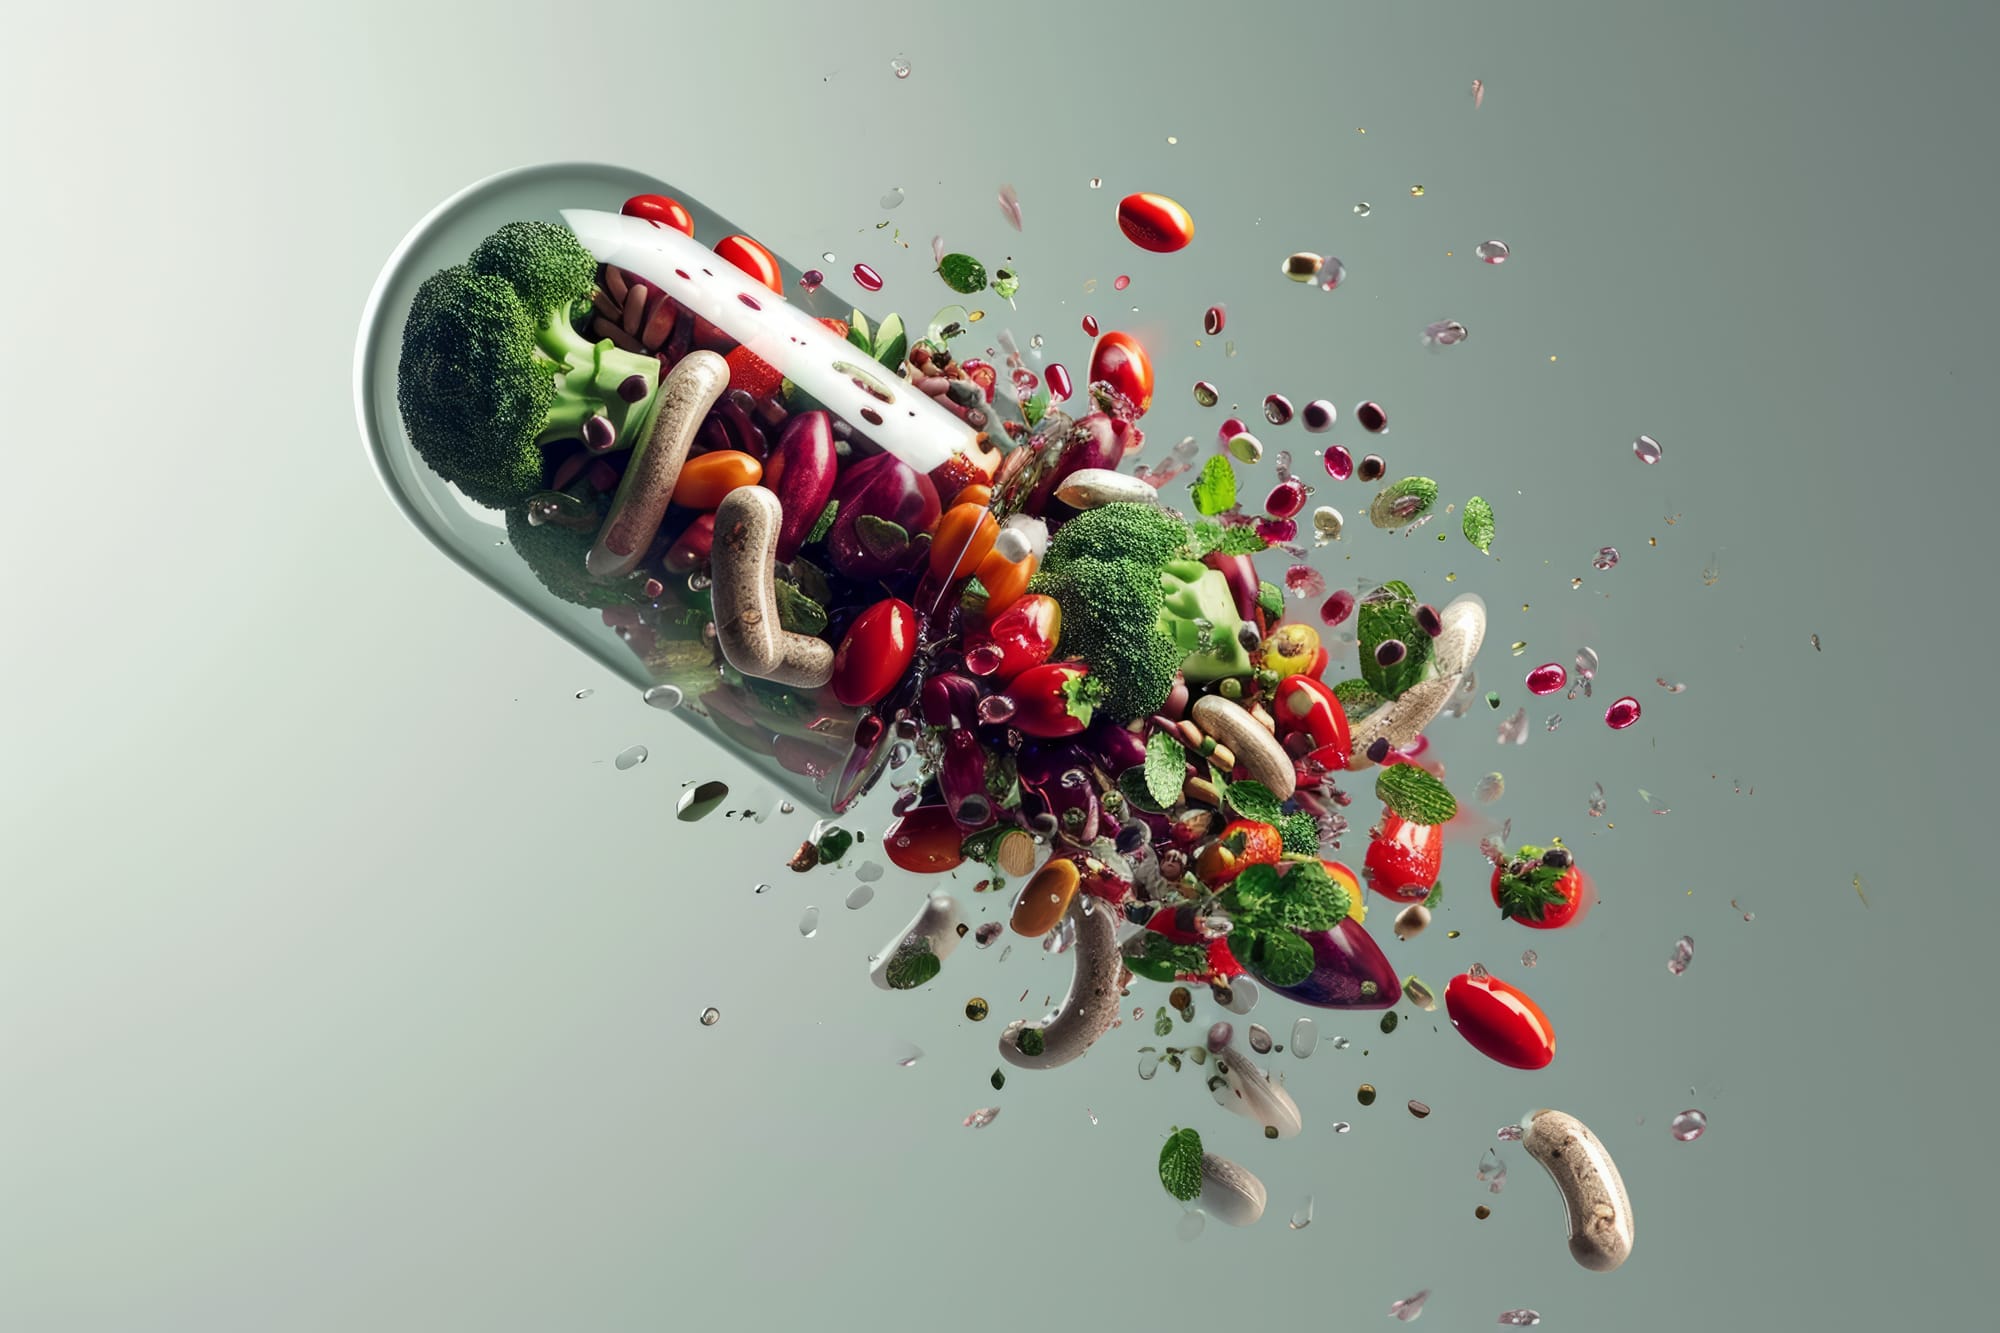 Wellness Weekly: Can food be considered medicine?